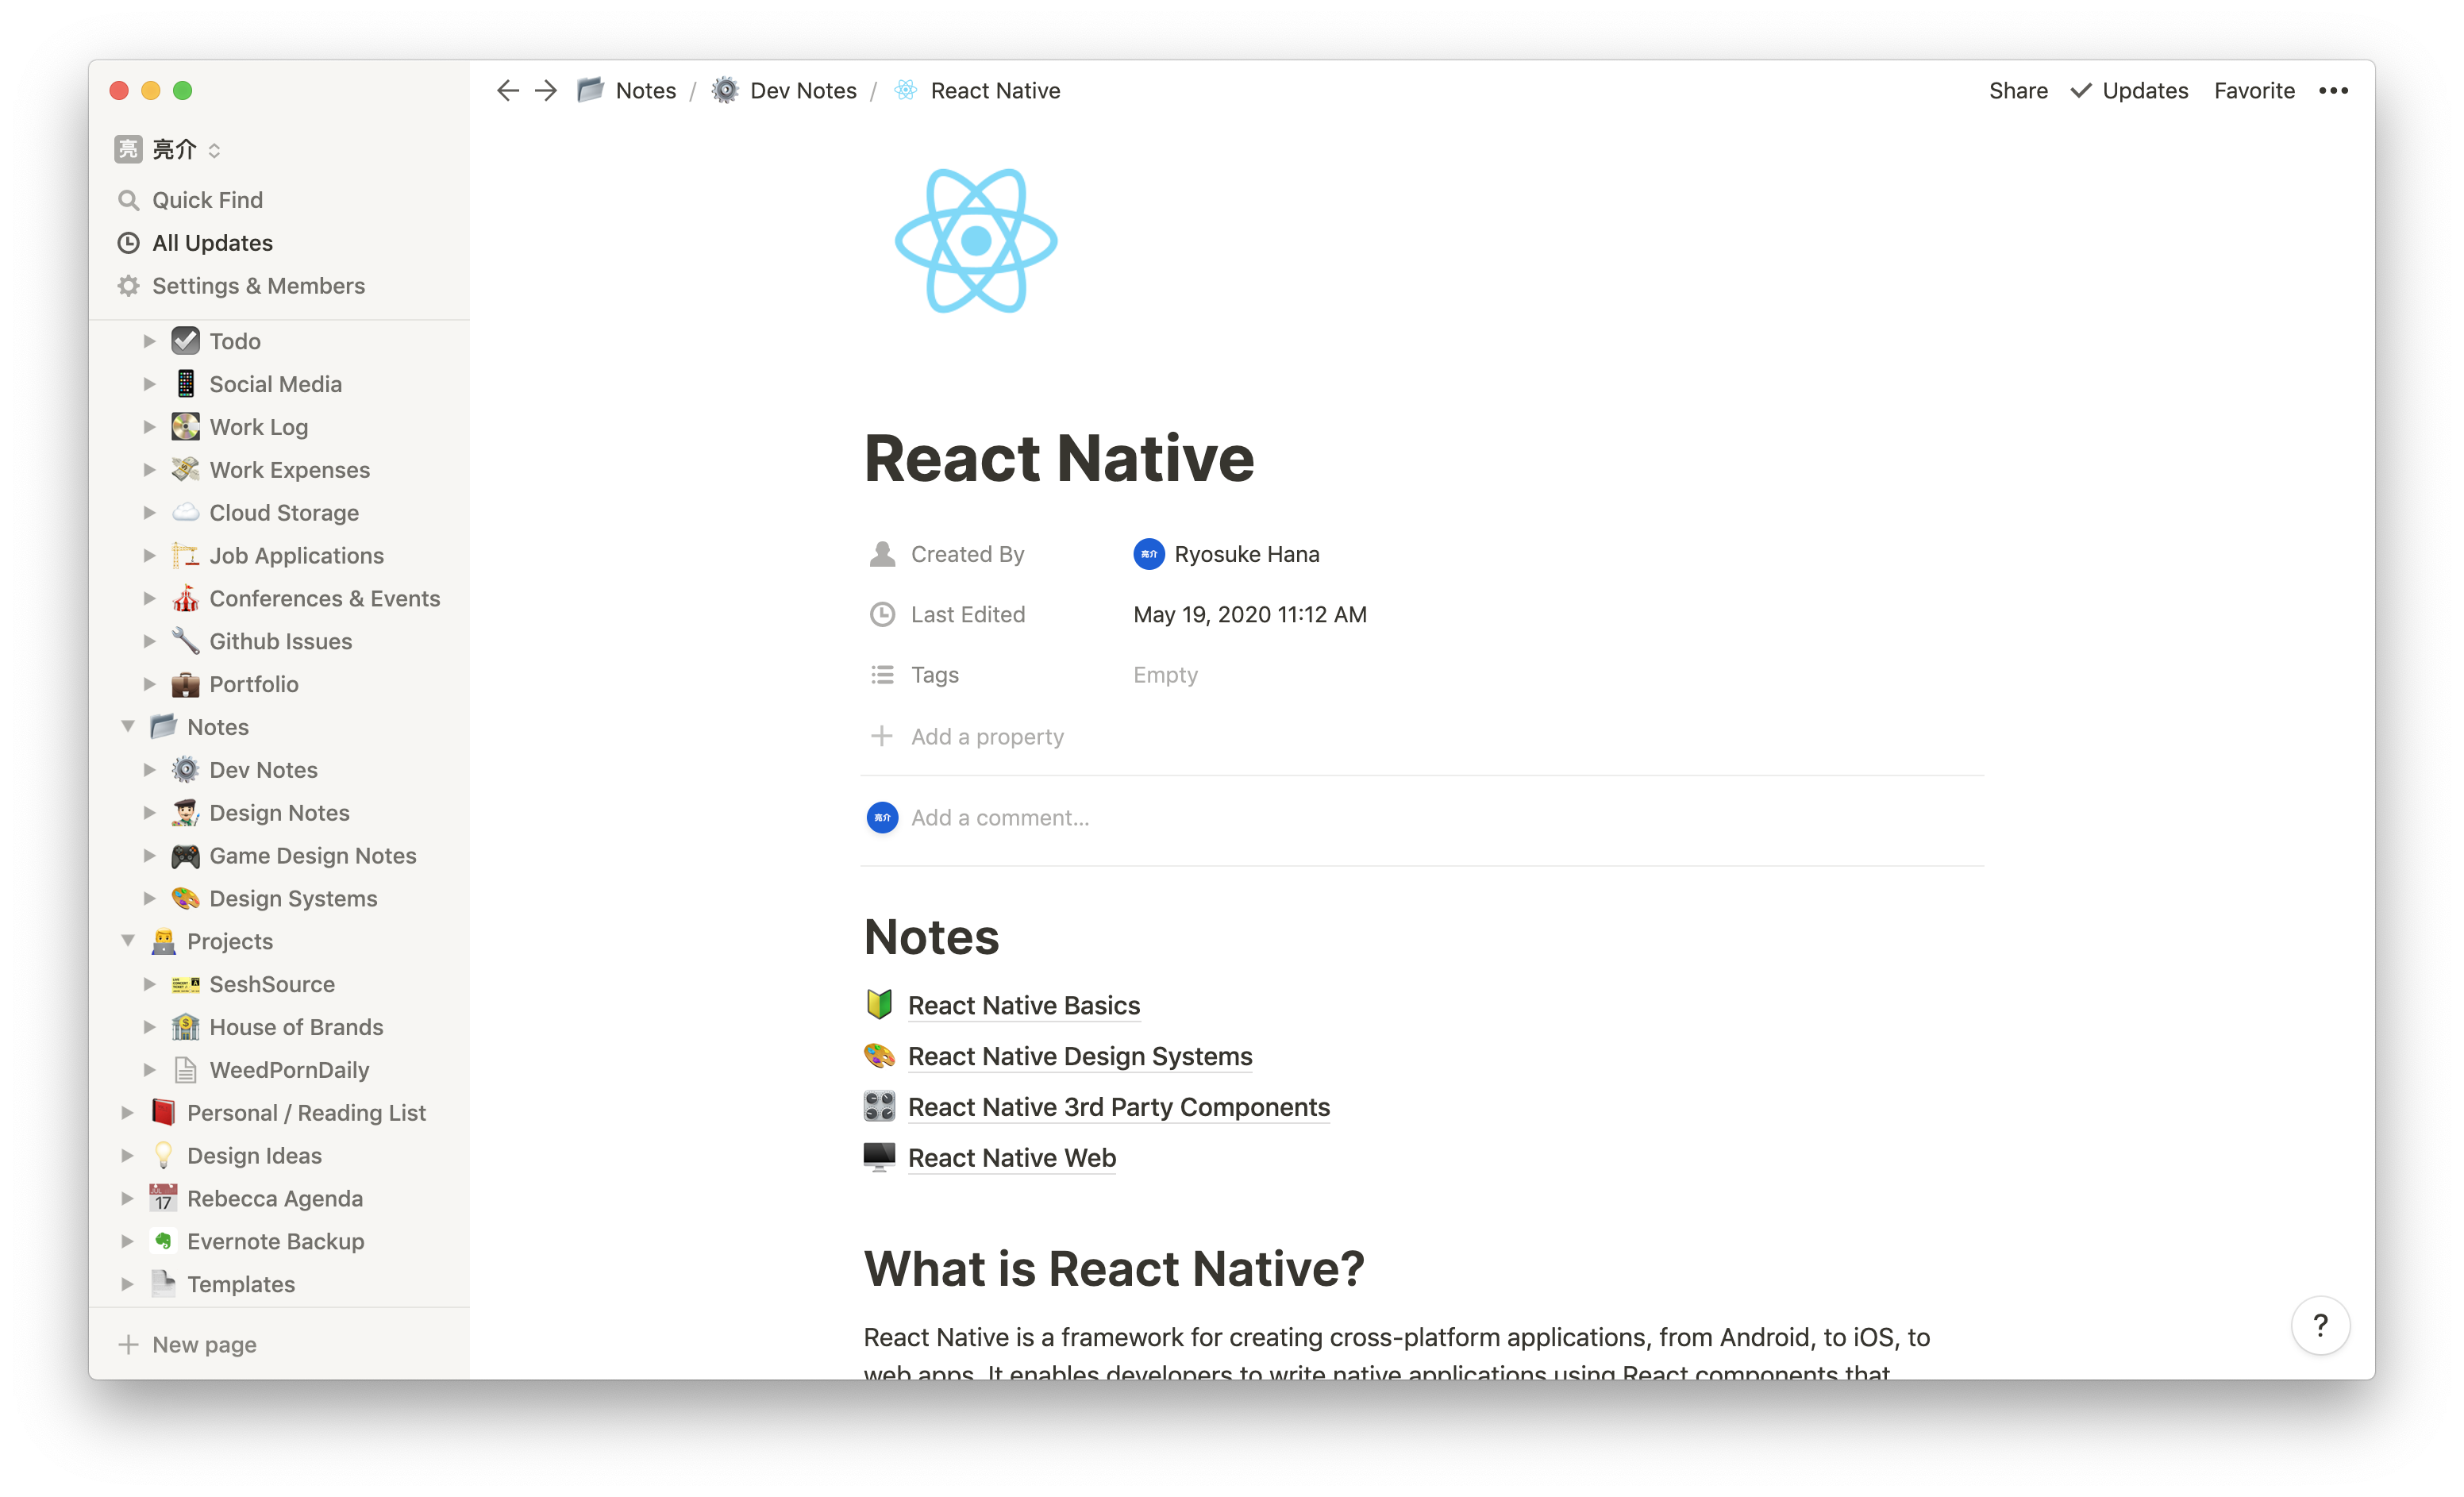 Screenshot of the Notion app on the React Native page with notes on the subject